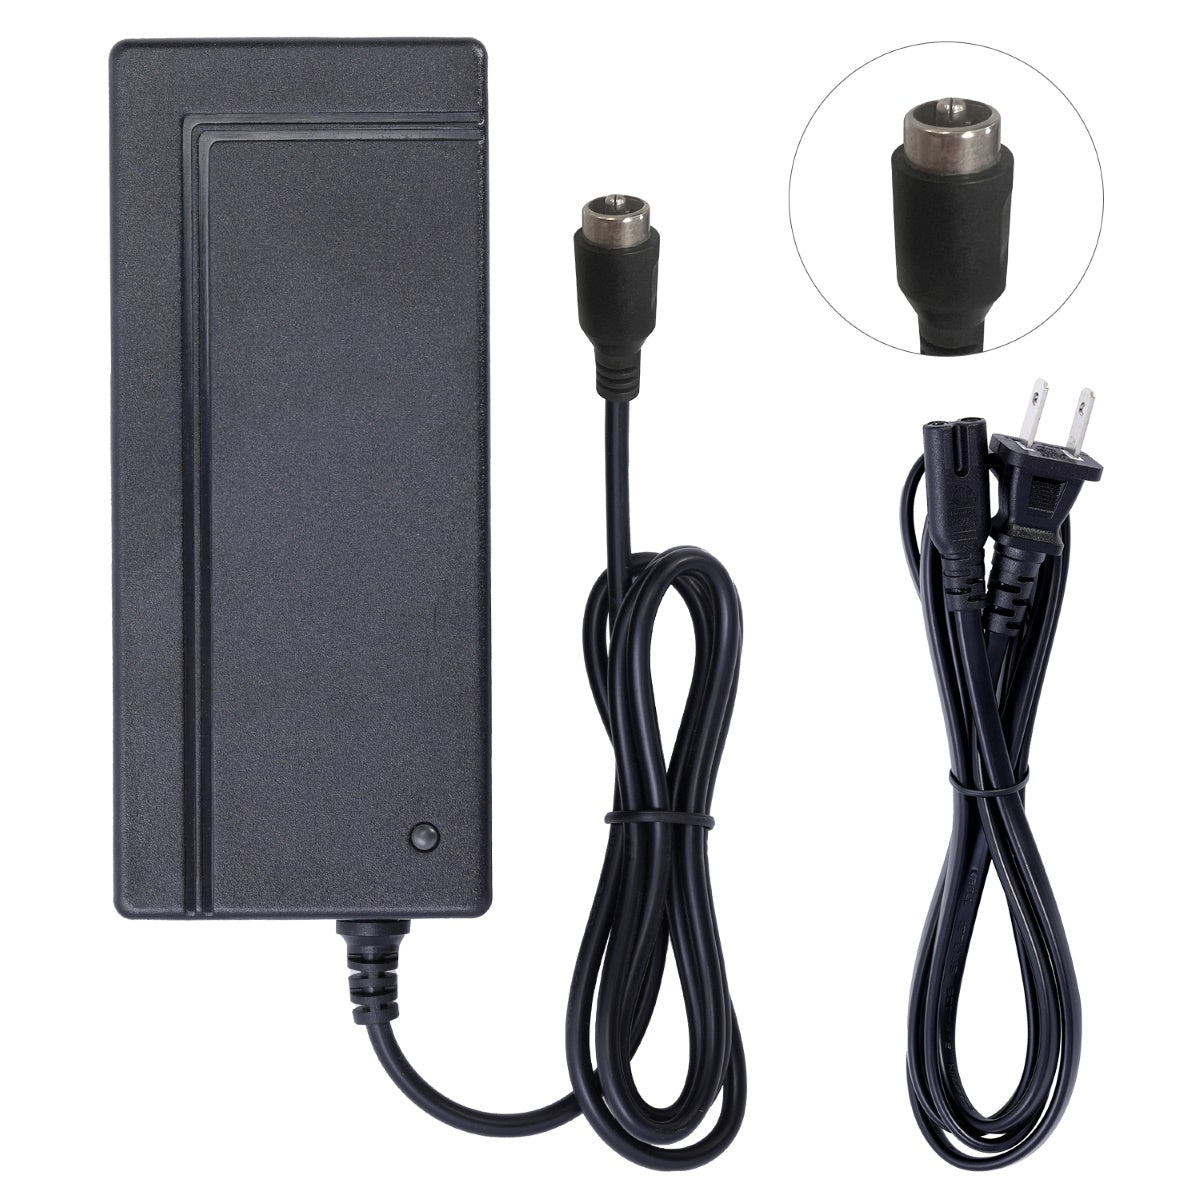 UL Listed Charger for Glion Dolly Electric Scooter (Please Select the Correct DC Connector Variant Before Ordering)